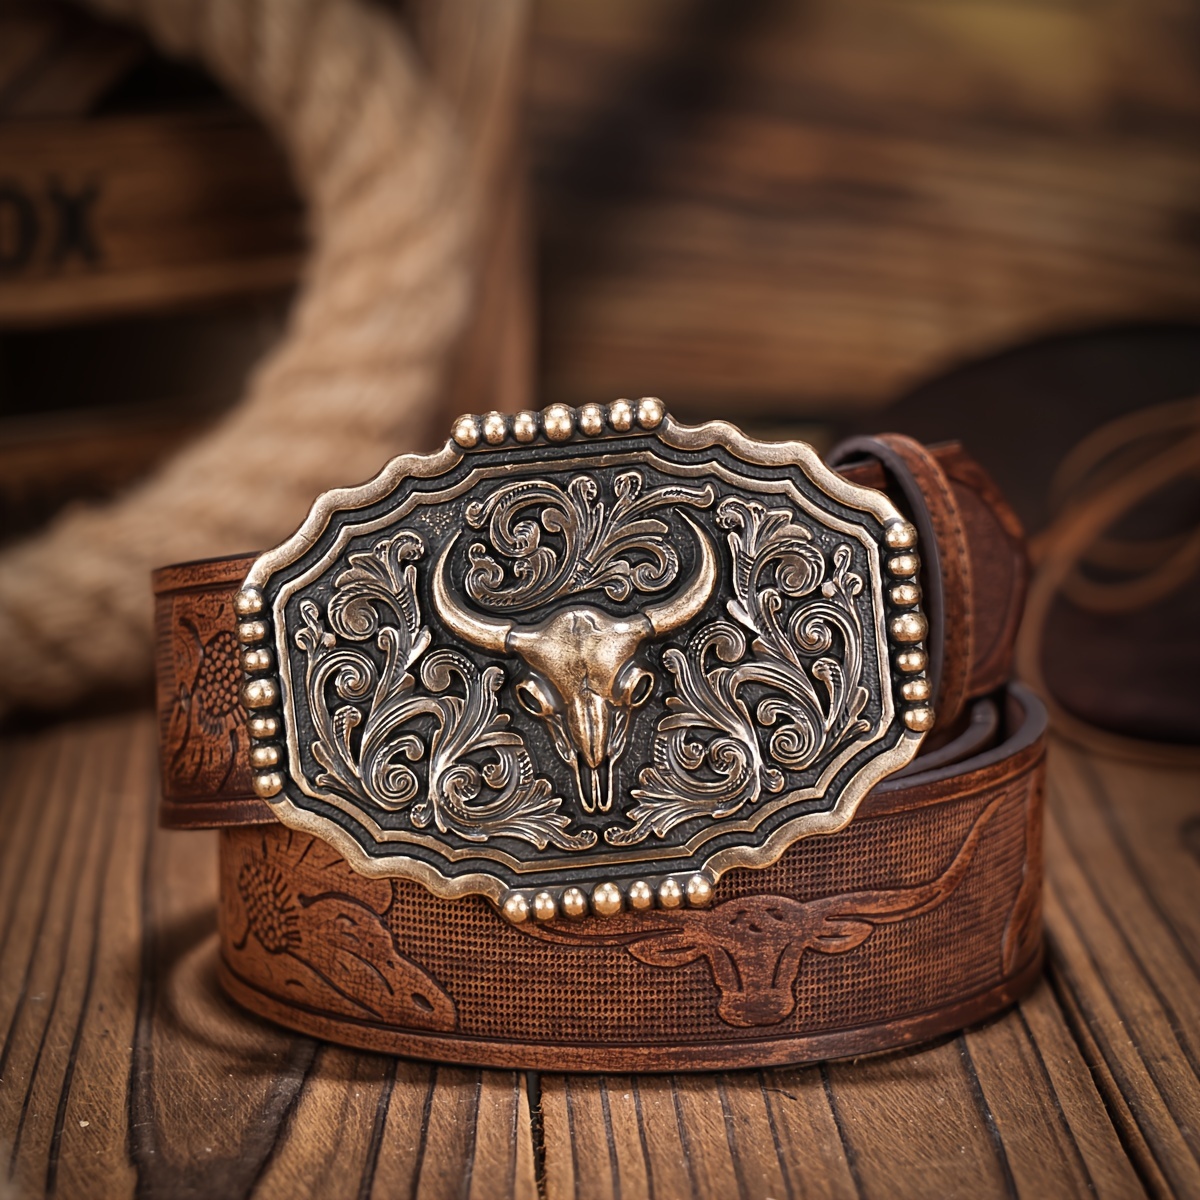 Fashion Men's Western Style PU Leather Bull Buckle Belt Suitable For Pants  Jeans